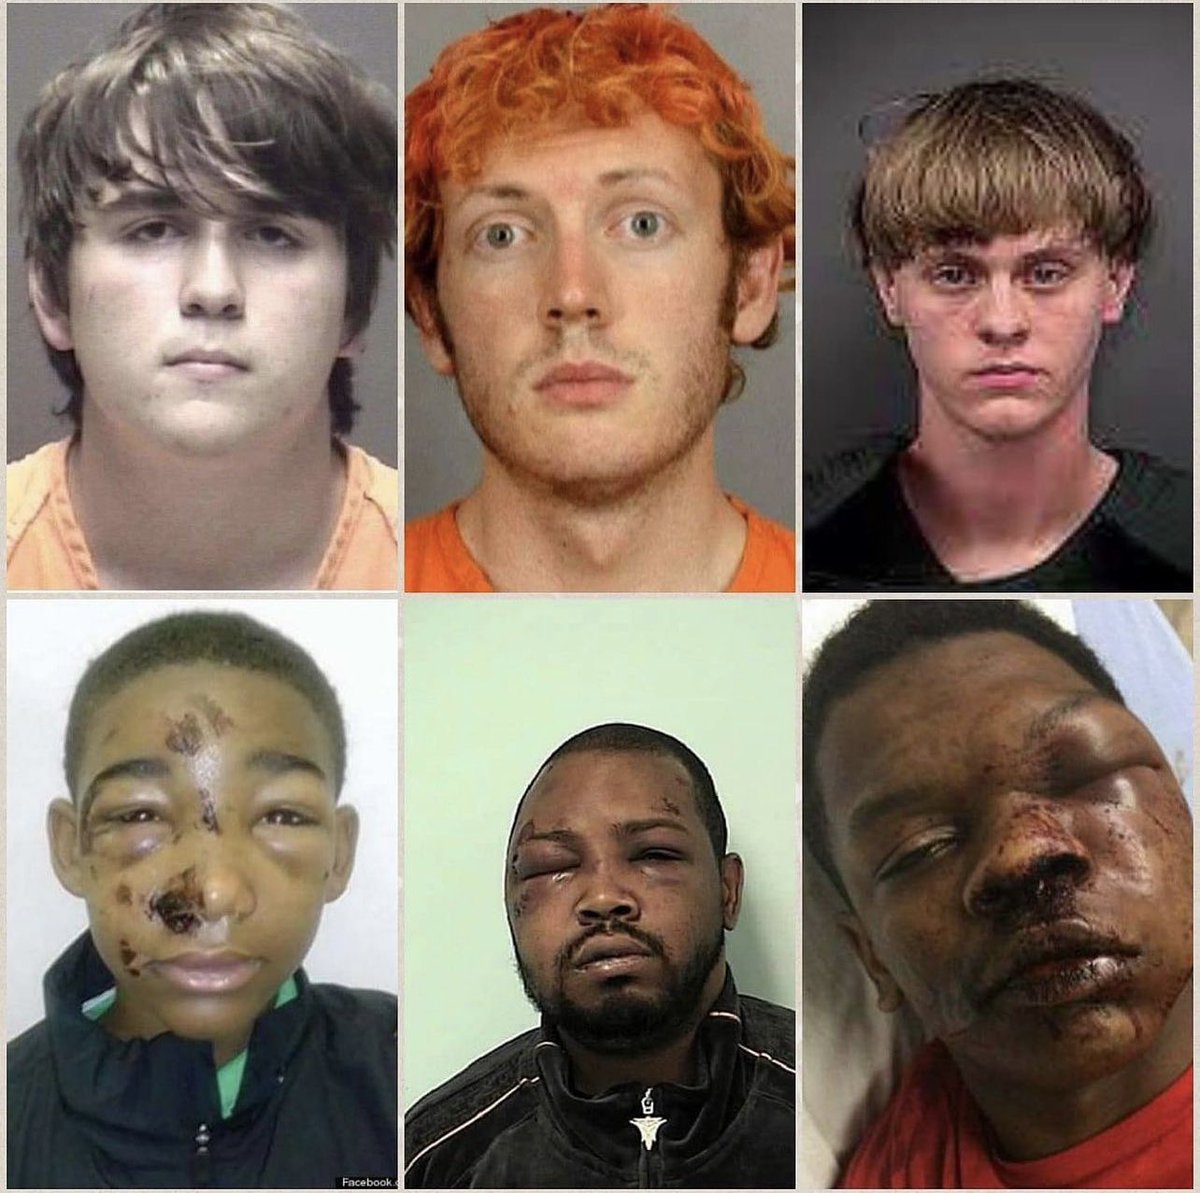 3 of them killed 30 people. 3 of them killed not a single soul. Look at the differences in the mugshots.

This is what the institution of racism and white supremacy looks like in our “justice” system.